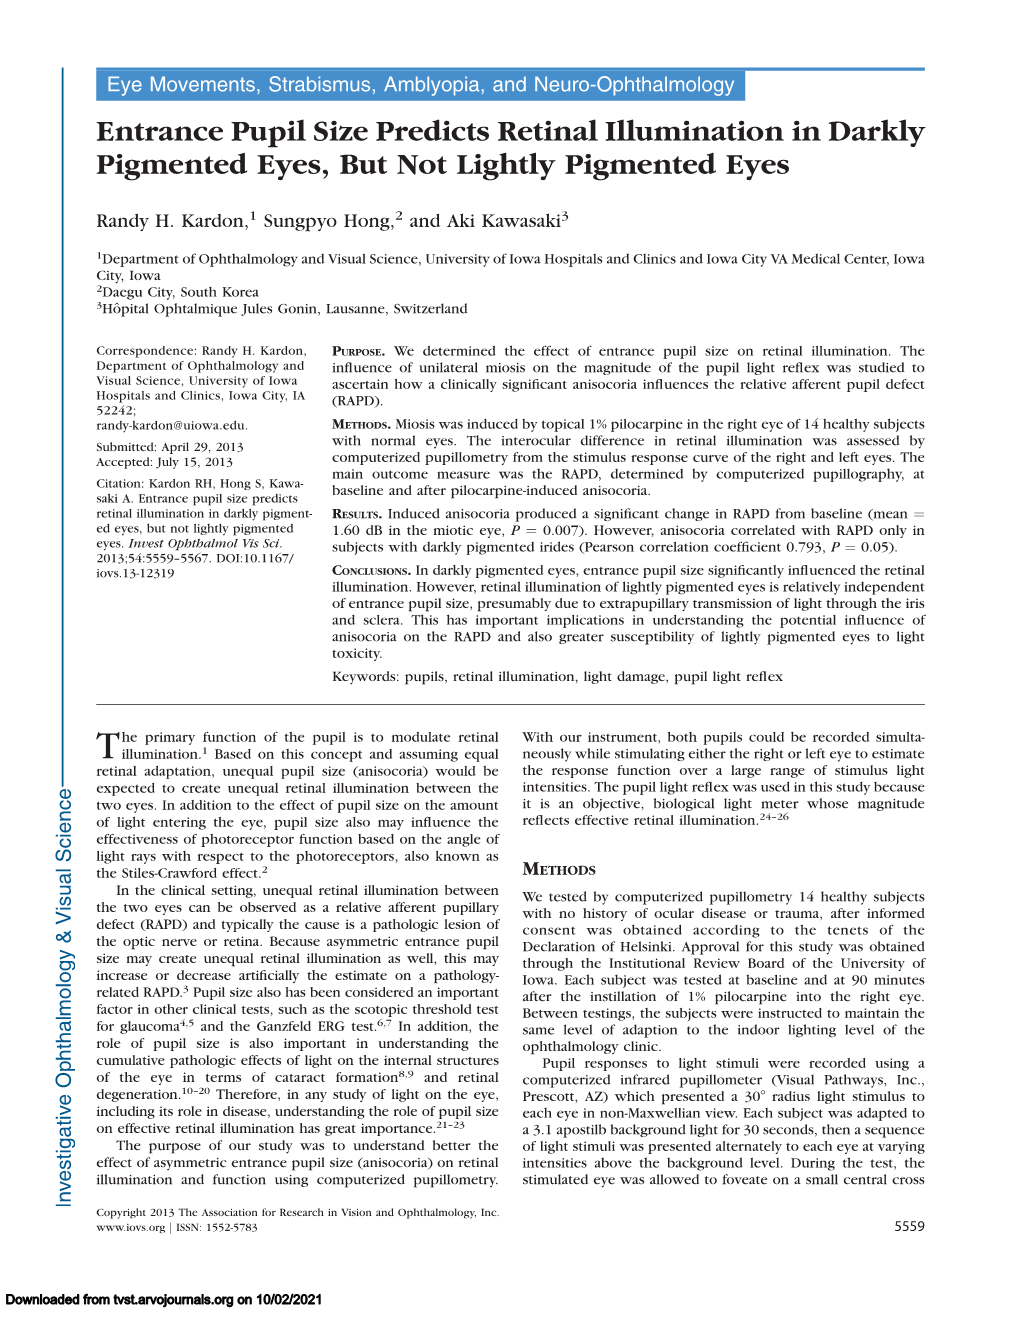 Entrance Pupil Size Predicts Retinal Illumination in Darkly Pigmented Eyes, but Not Lightly Pigmented Eyes